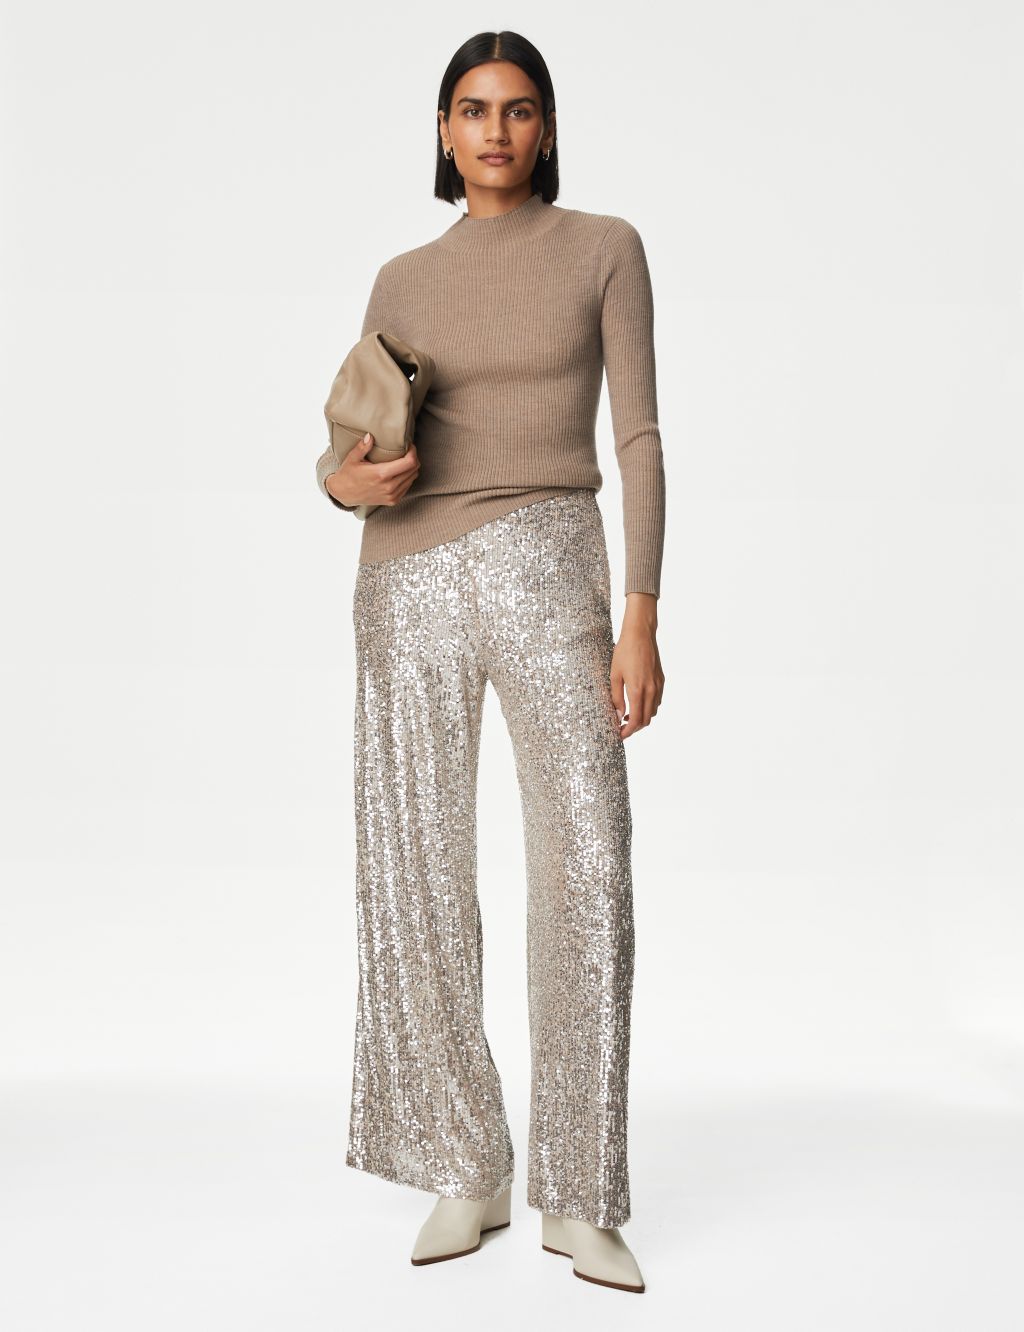 Sequin Elasticated Waist Wide Leg Trousers image 7